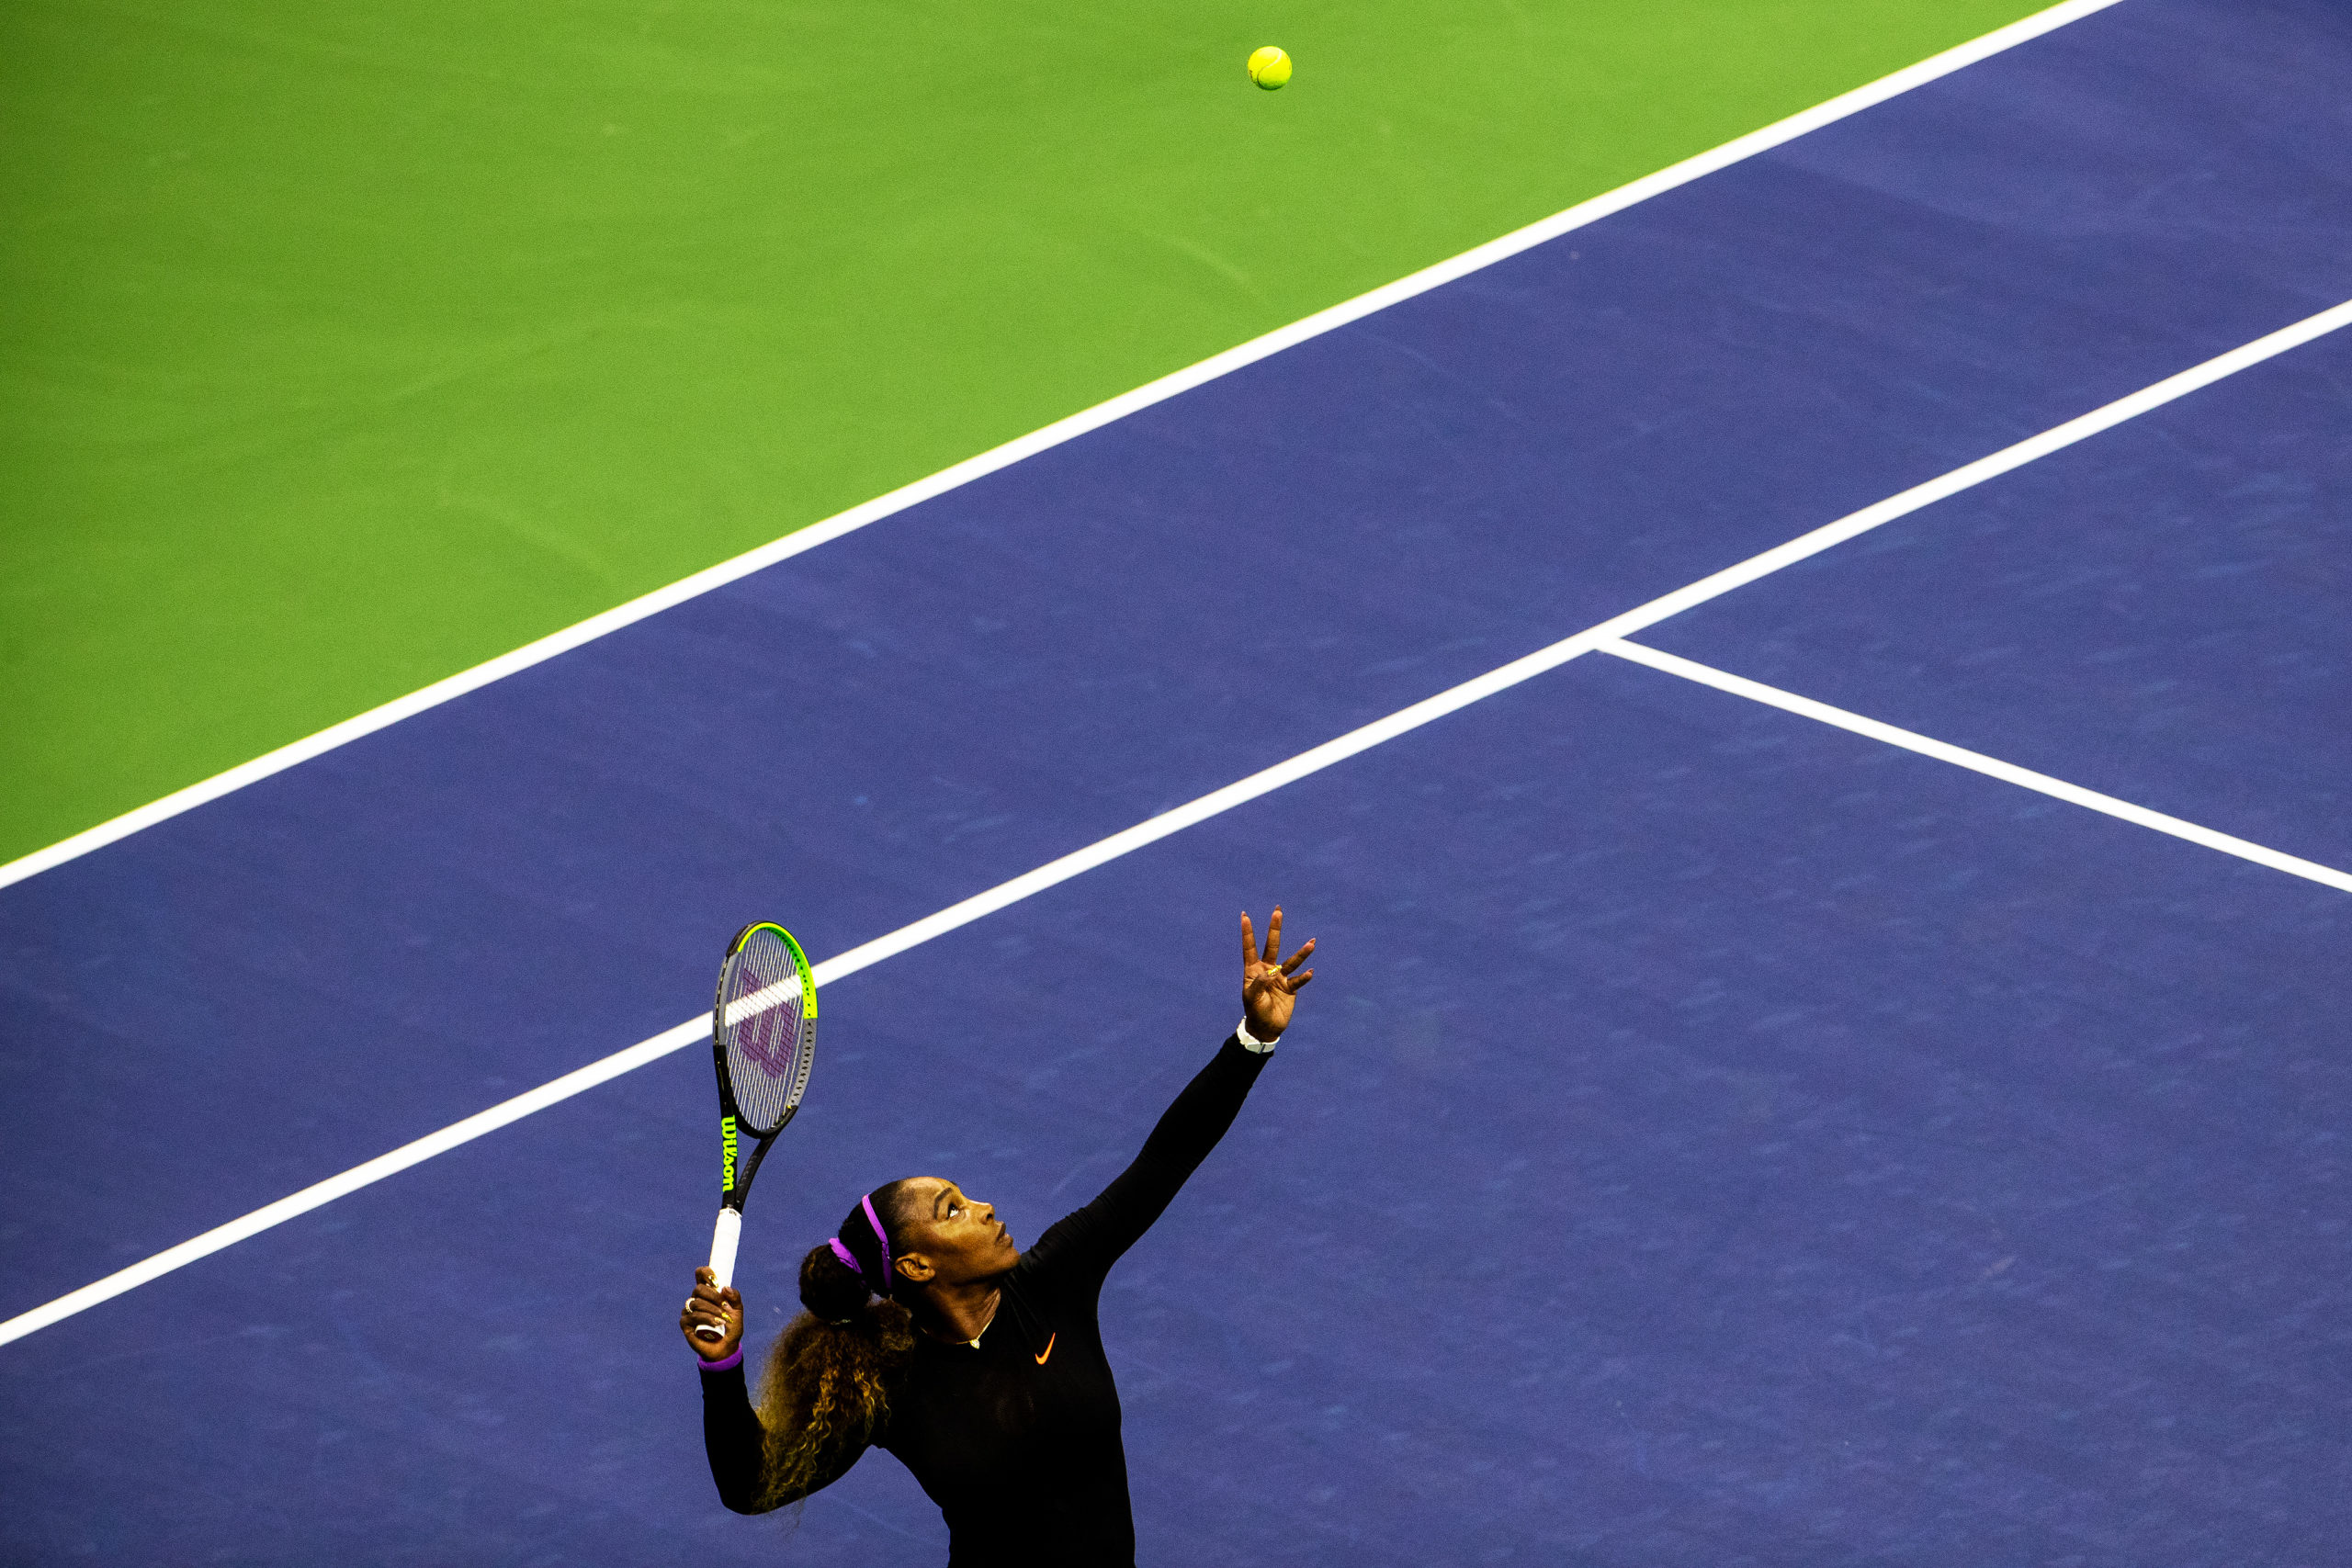 NYTOPEN: FLUSHING, NY. - August 26, 2019: Serena Williams serves to Maria Sharapova in the first round of the US Open at Arthur Ash Stadium in Flushing, New York. CREDIT: Demetrius Freeman for The New York Times